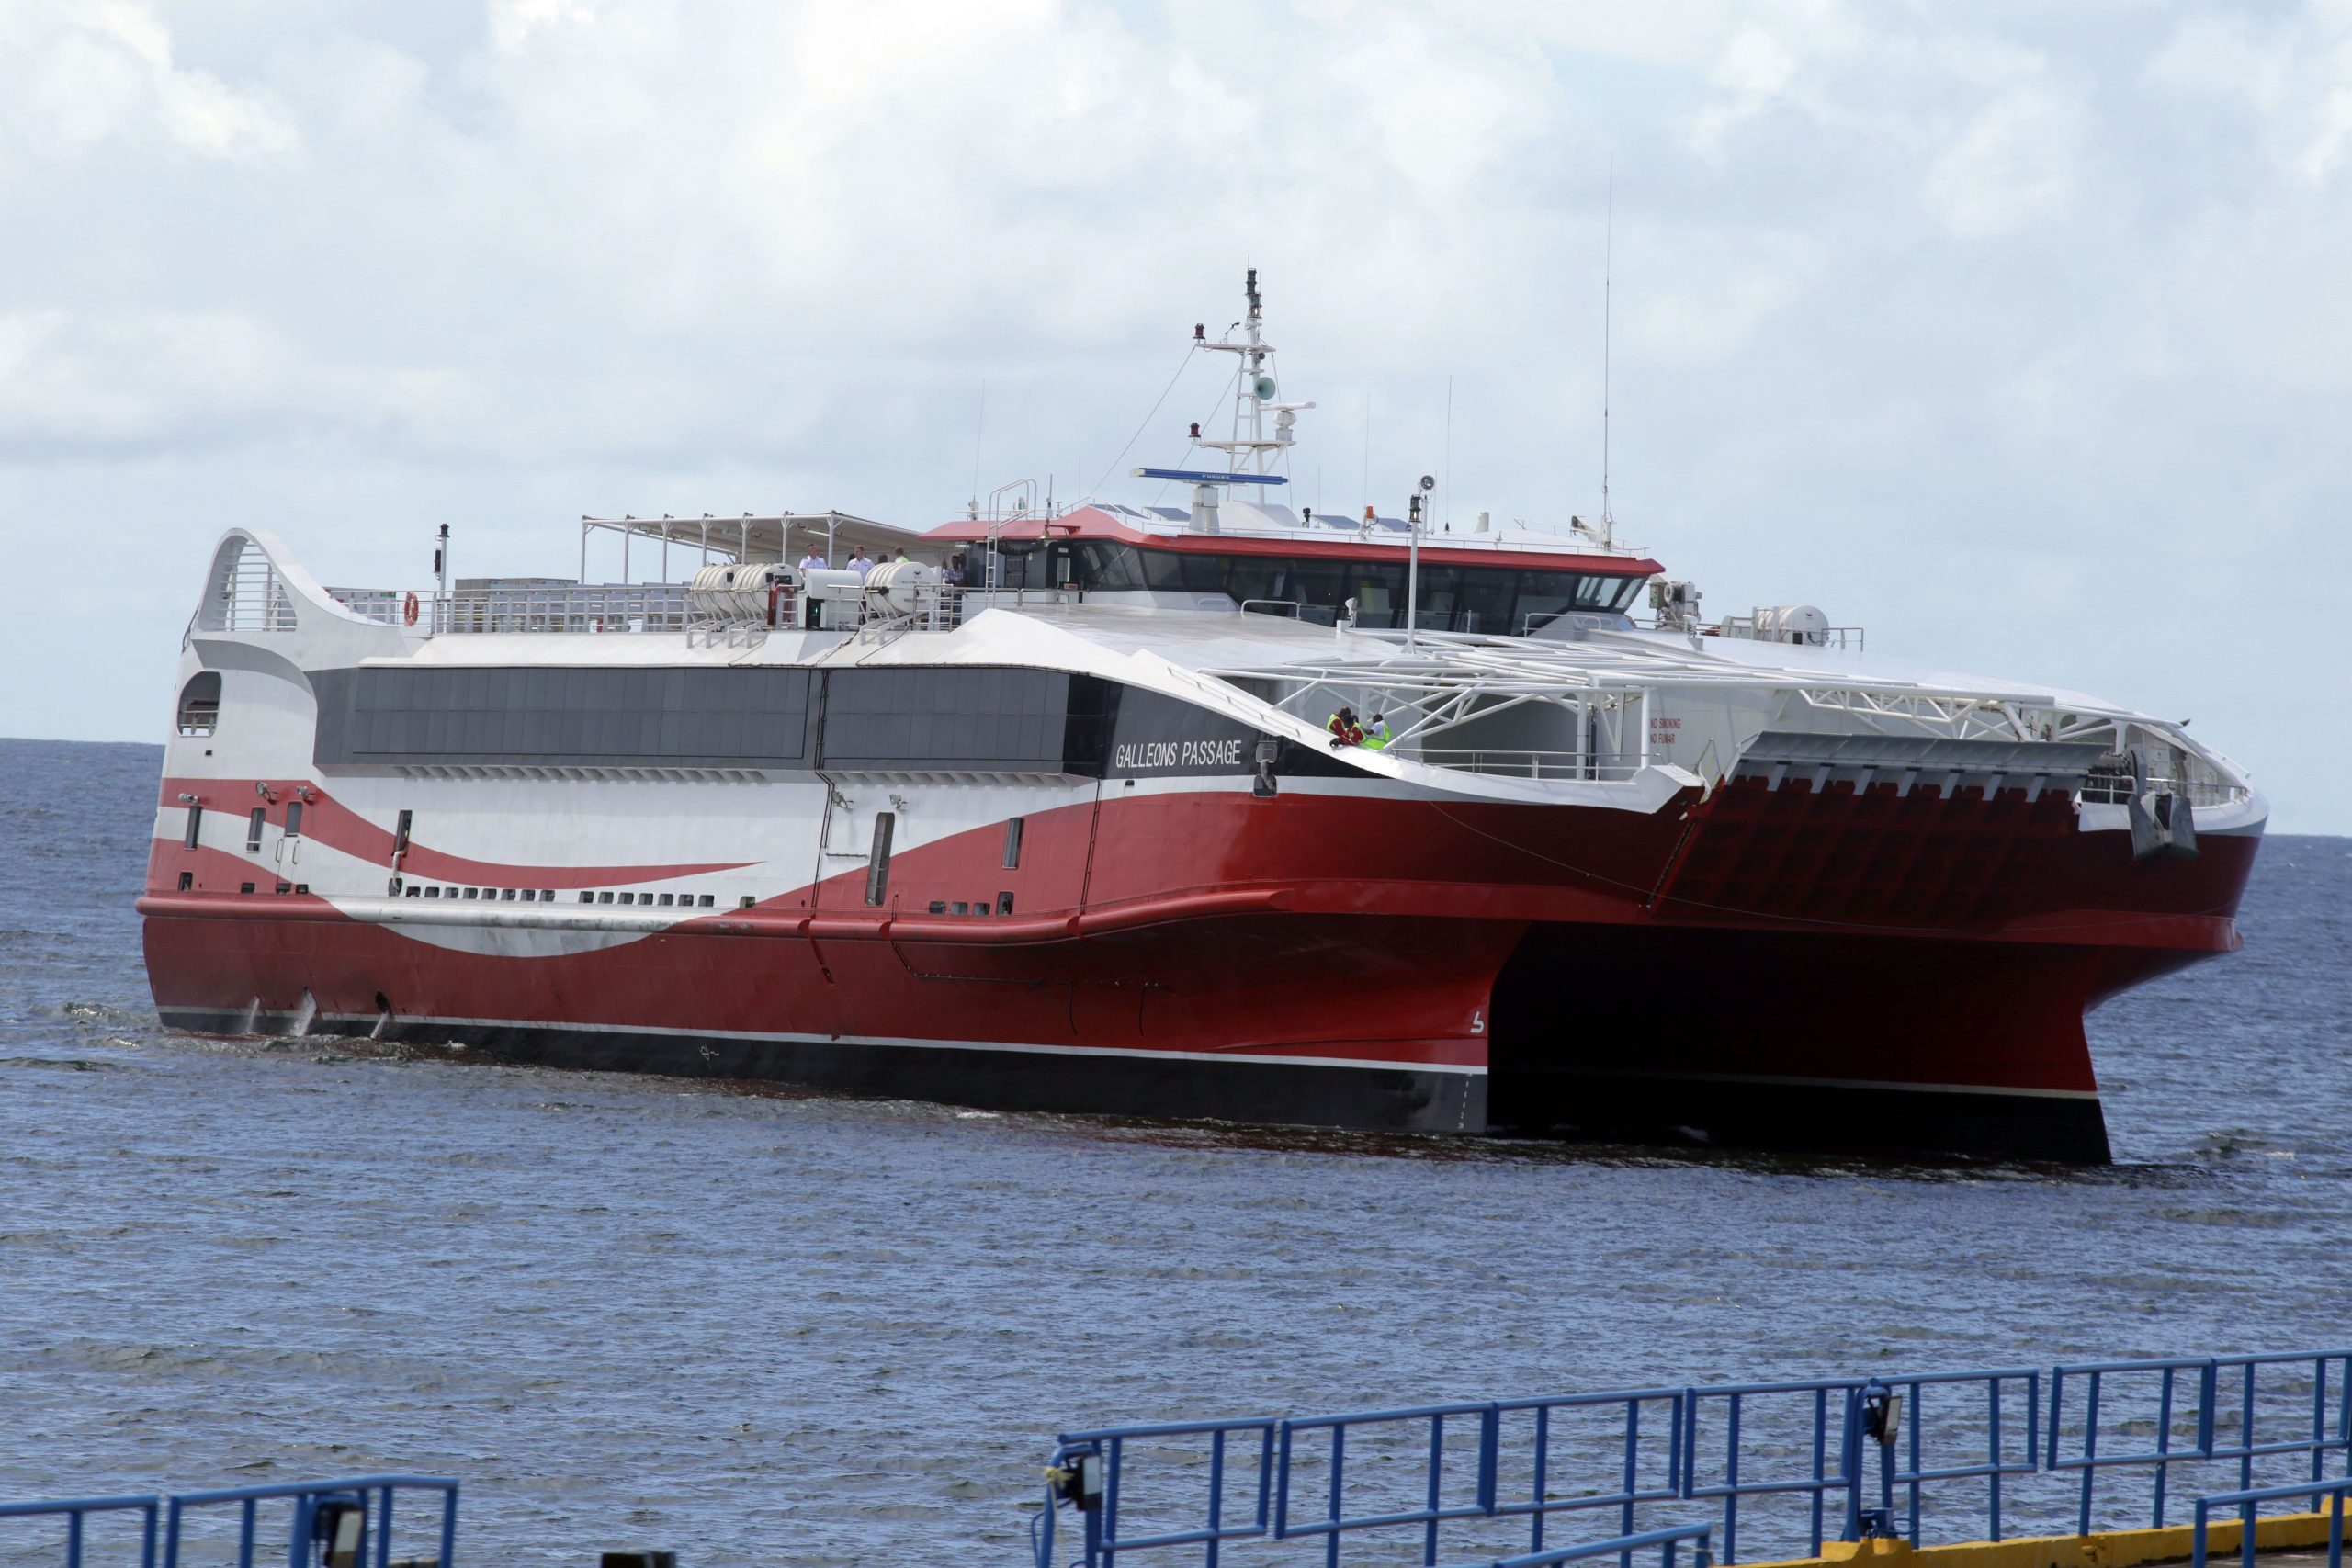 MV Galleons Passage Taken Out Of Service To Undergo Annual CLASS Recertification